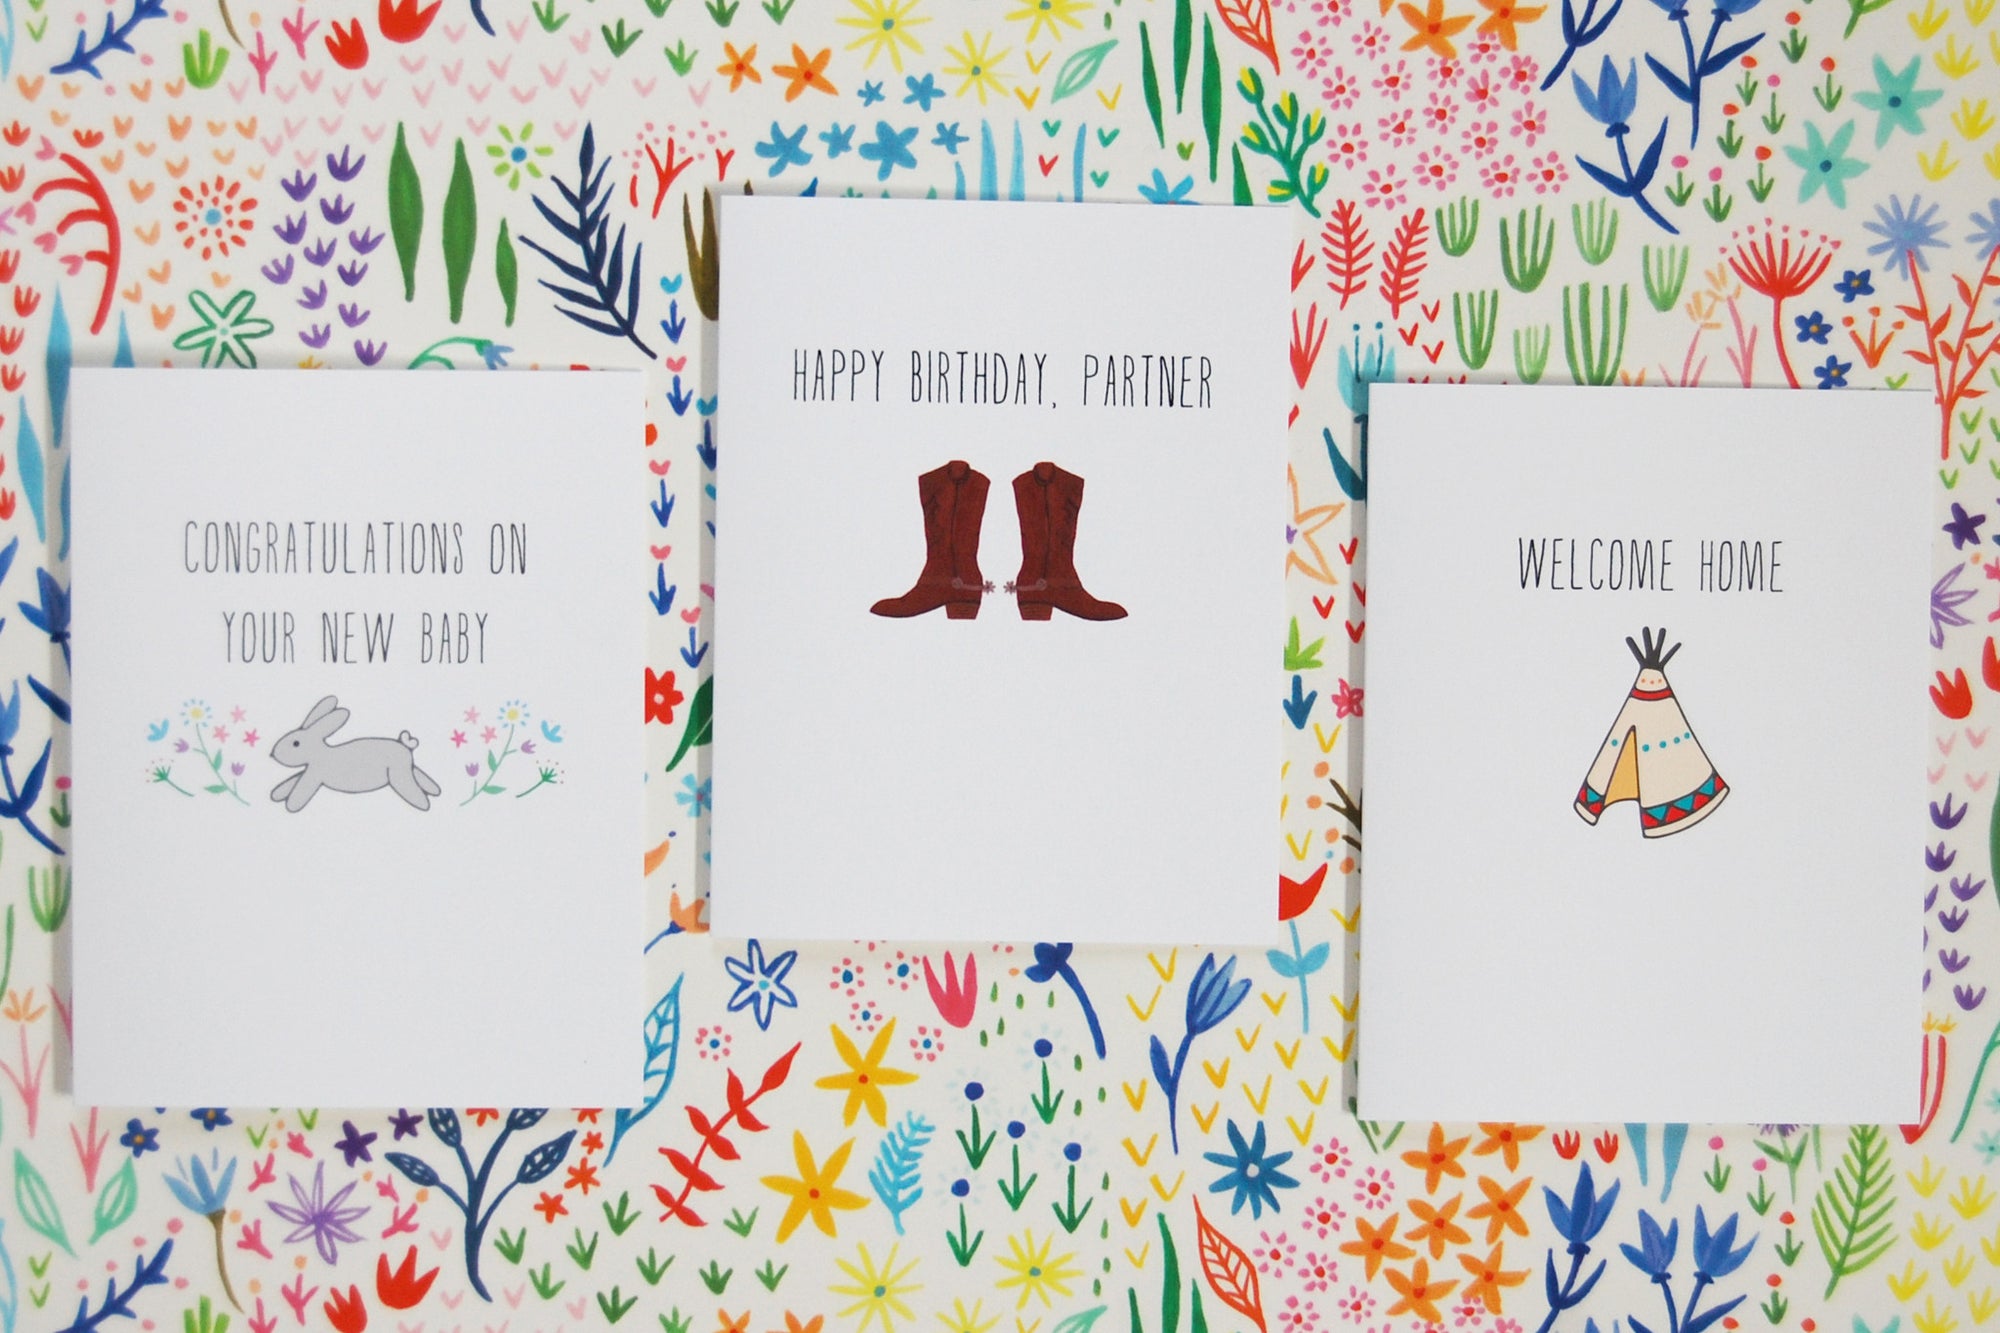 Sweet and Simple Greeting Cards